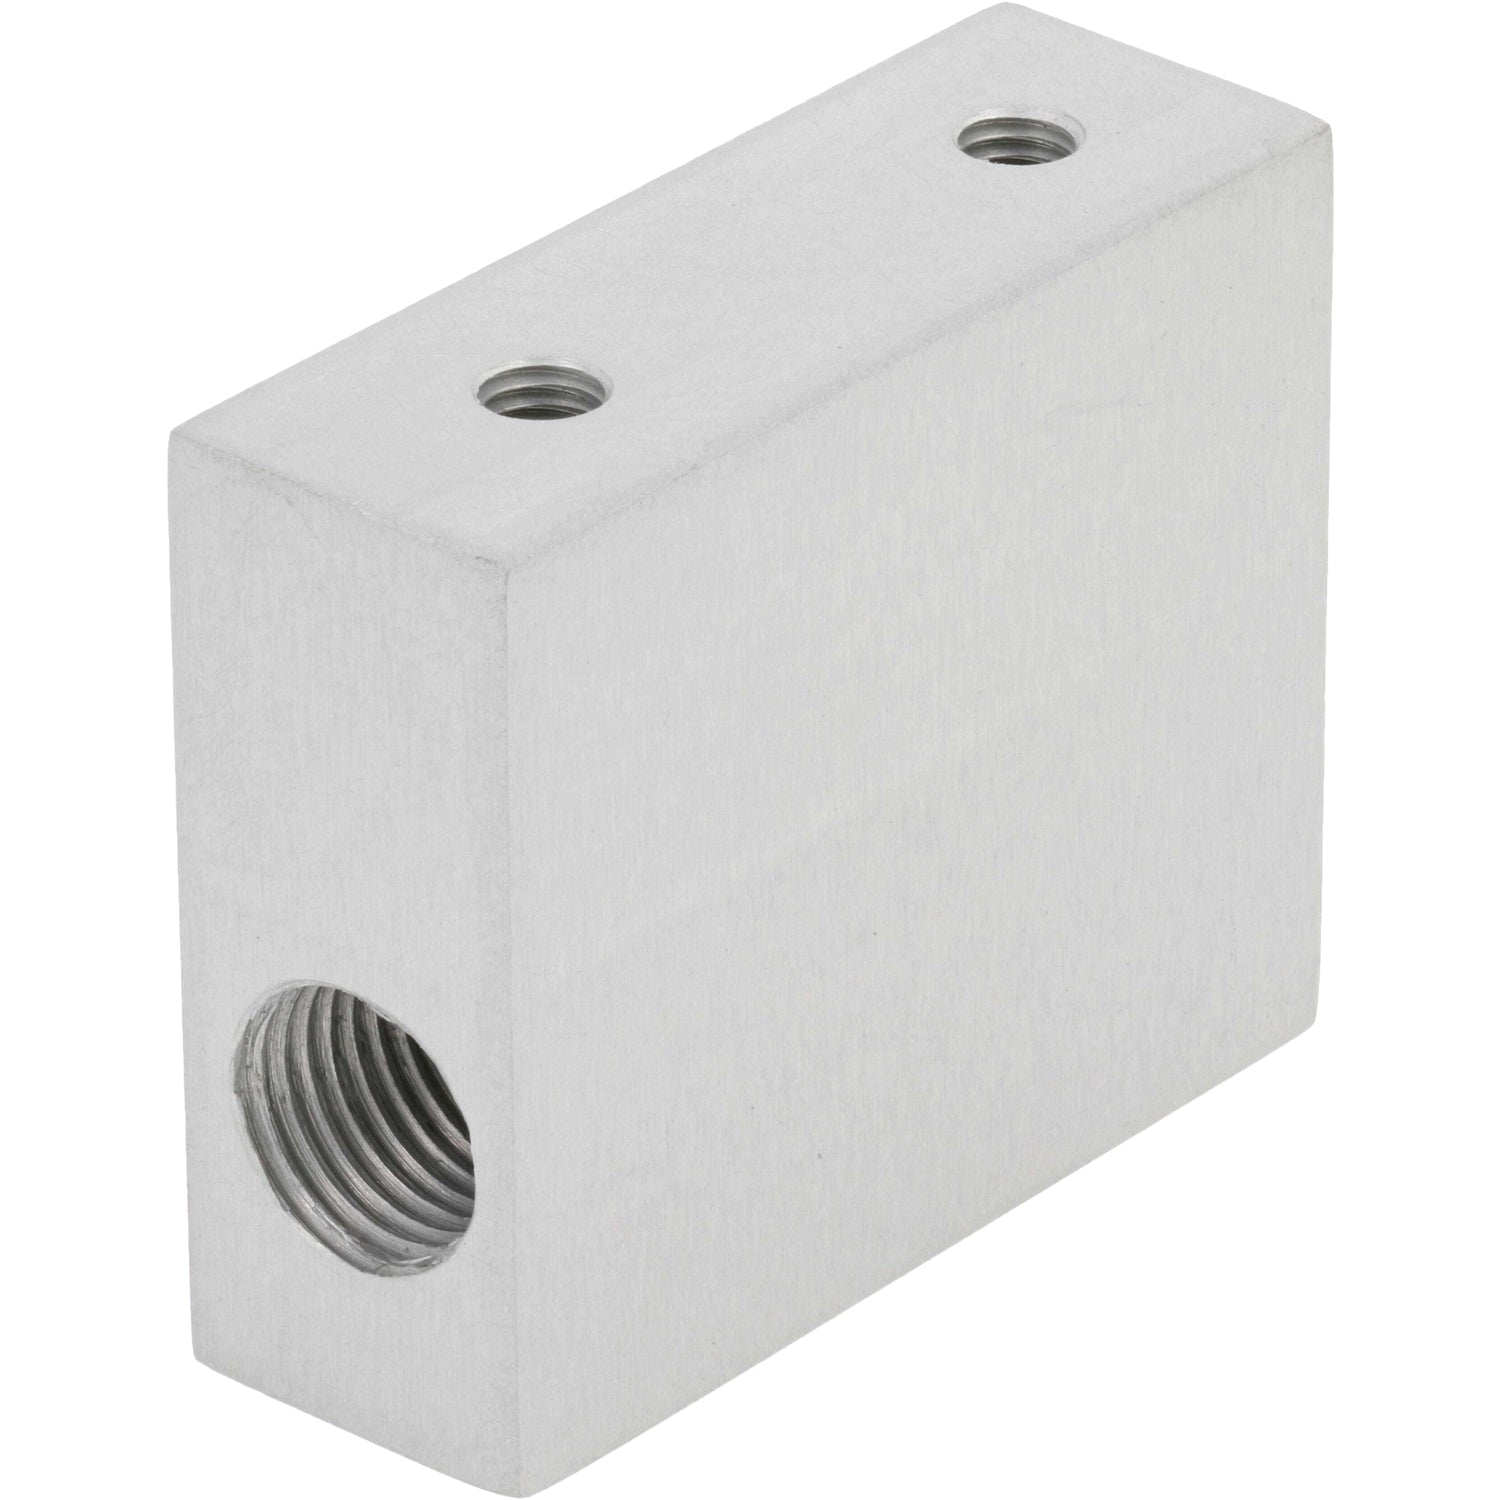 Rectangular hard anodized aluminum block. Two smaller threaded holes are on the top surface and one larger threaded hole is on the front surface. Part shown on white background. 